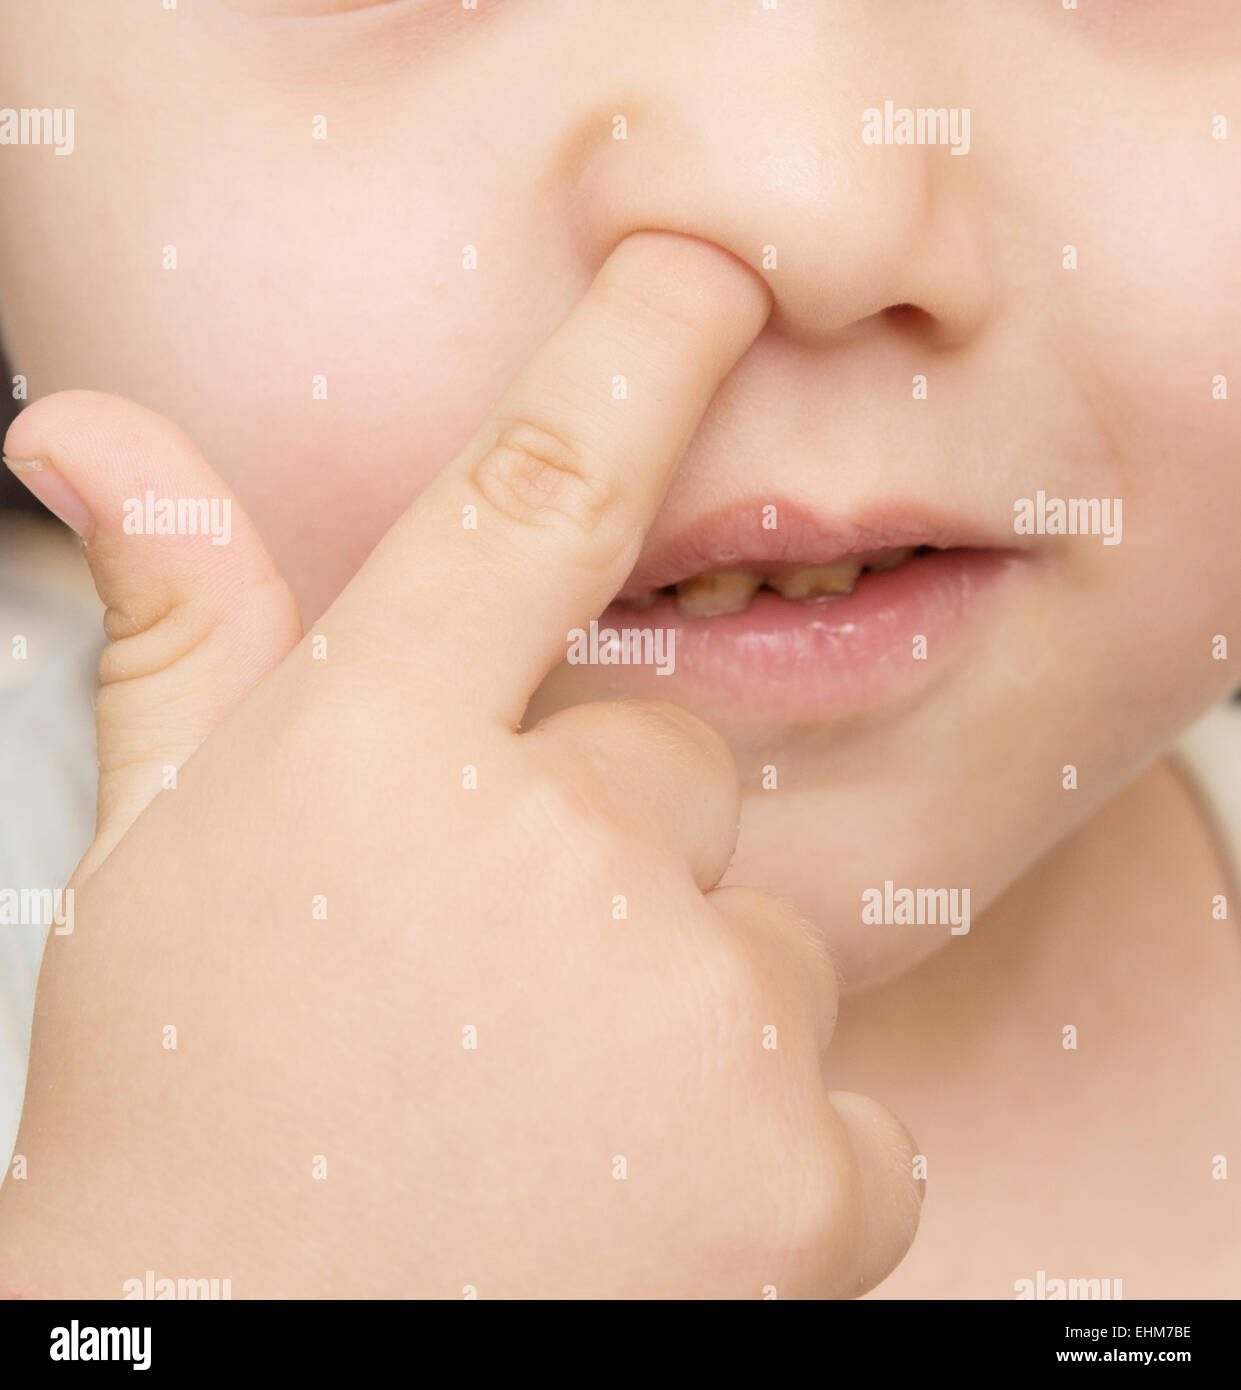 finger in nose Stock Photo